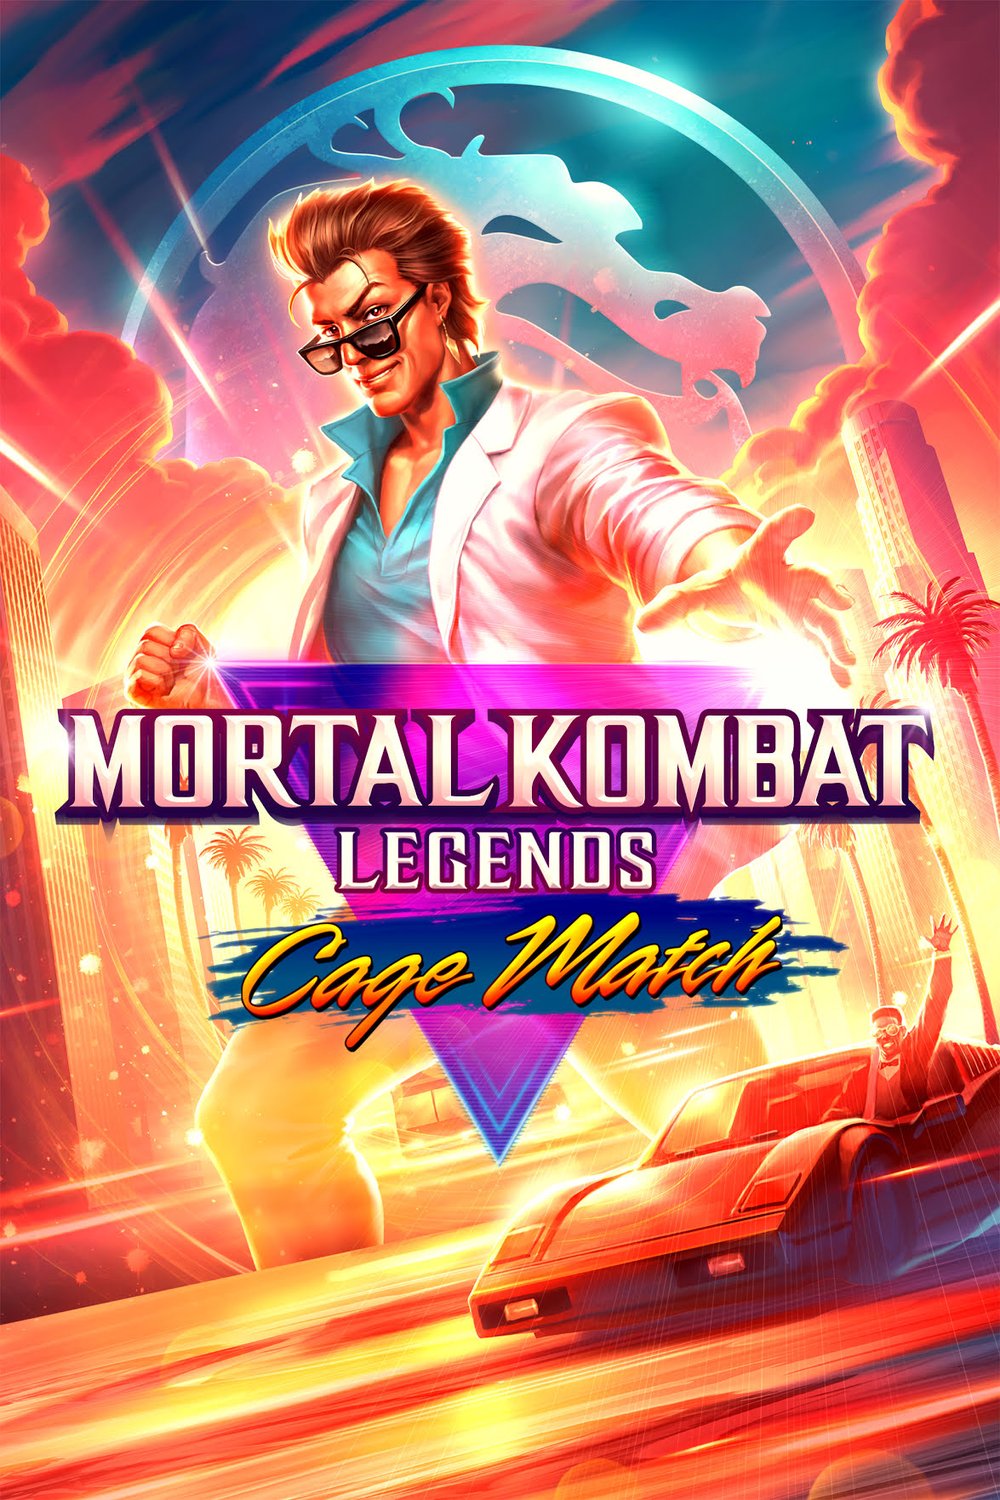 Poster of the movie Mortal Kombat Legends: Cage Match